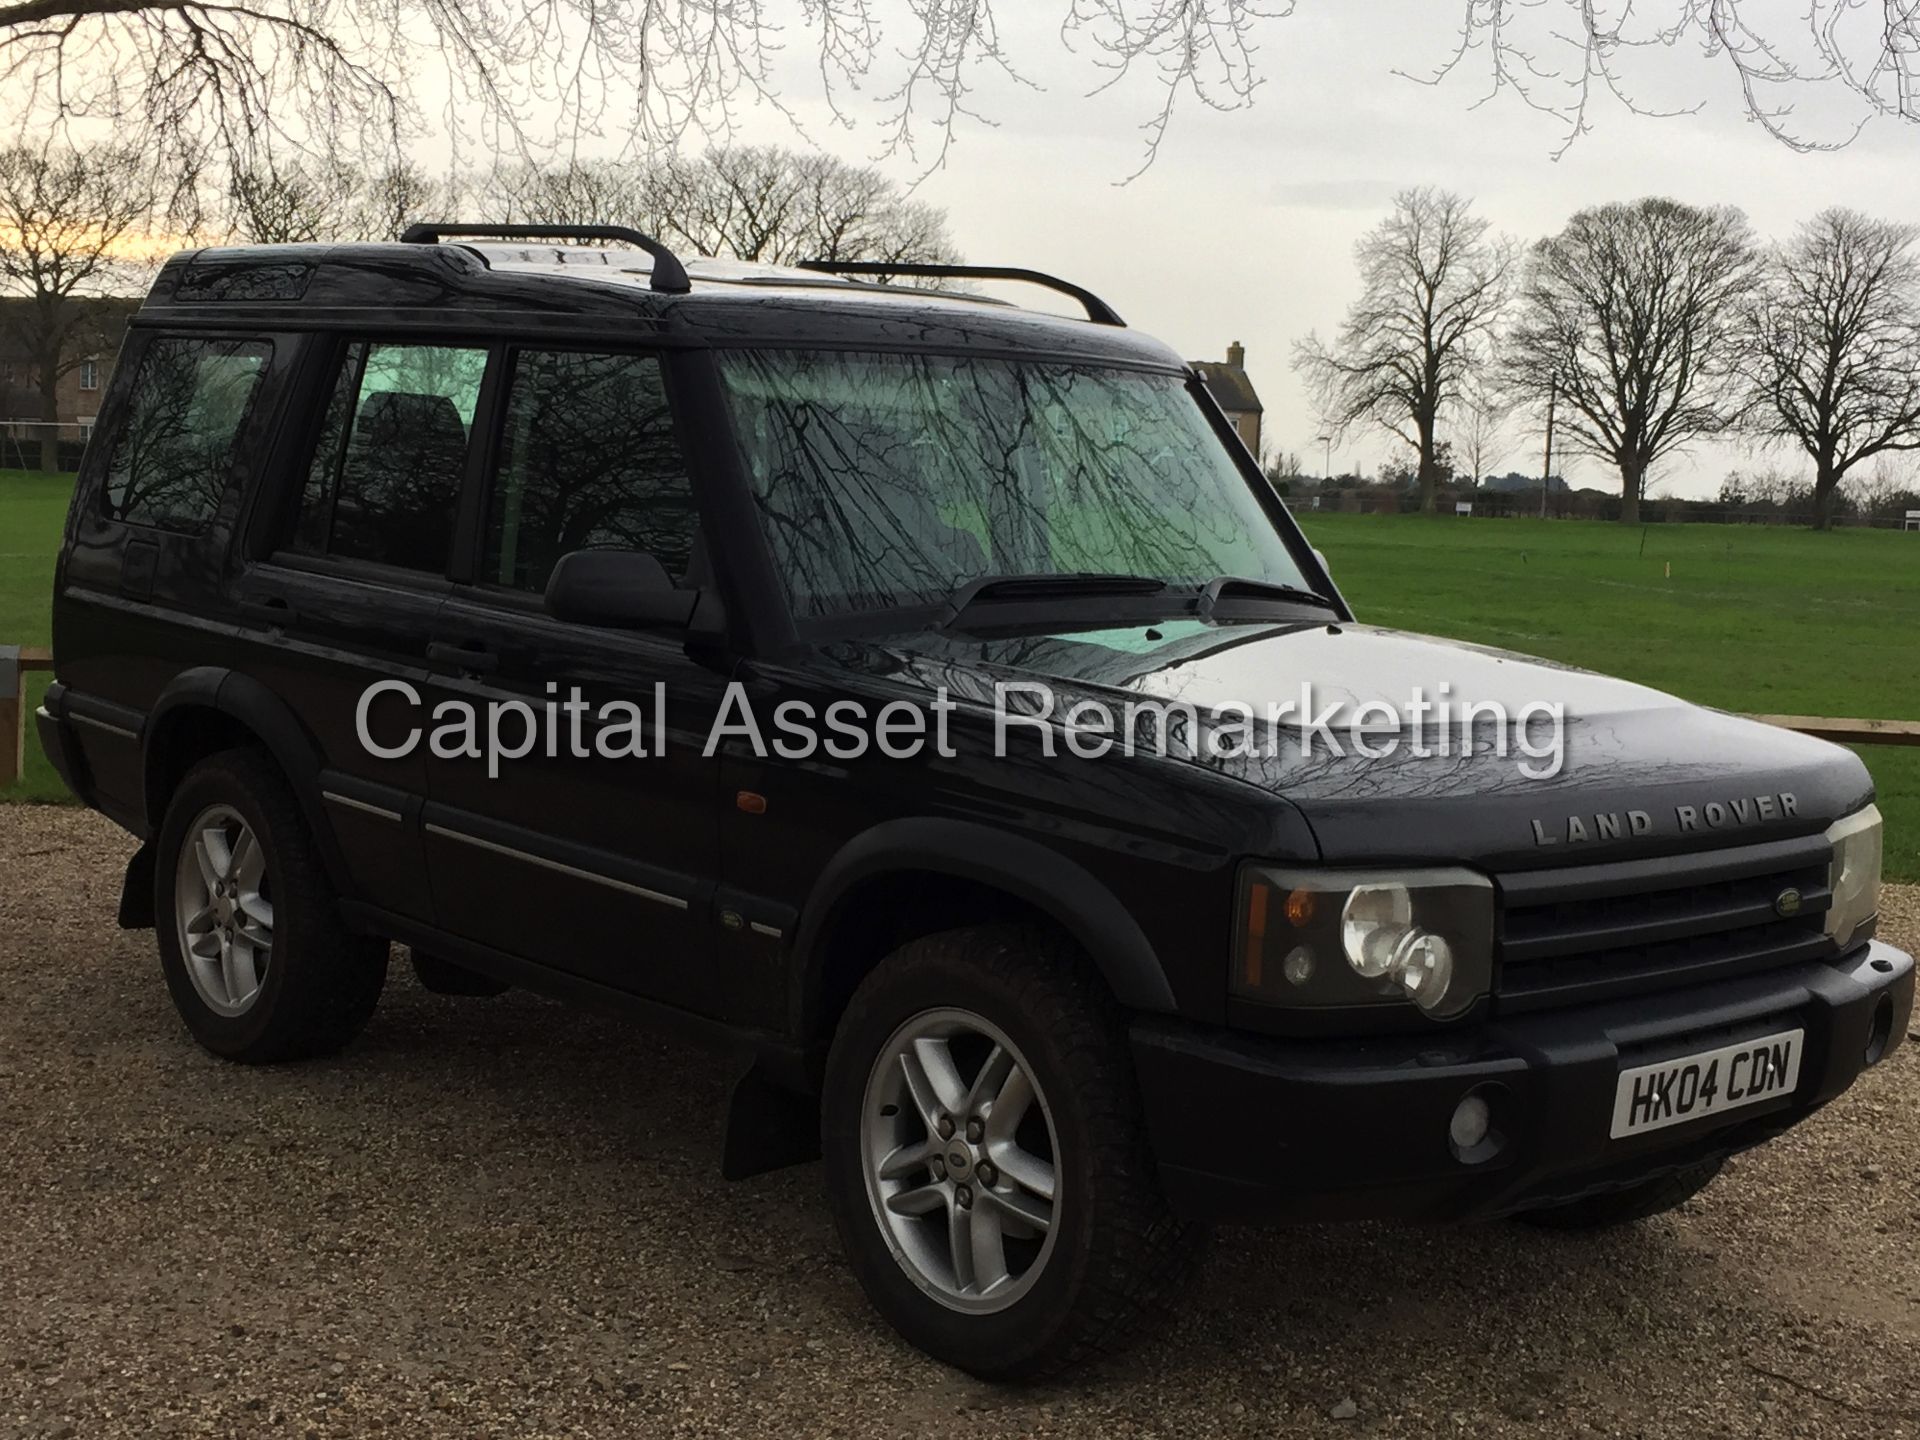 LAND ROVER DISCOVERY TD5 'LANDMARK' (2004 - 04 REG) 7 SEATER - LEATHER - AUTO (NO VAT - SAVE 20%)